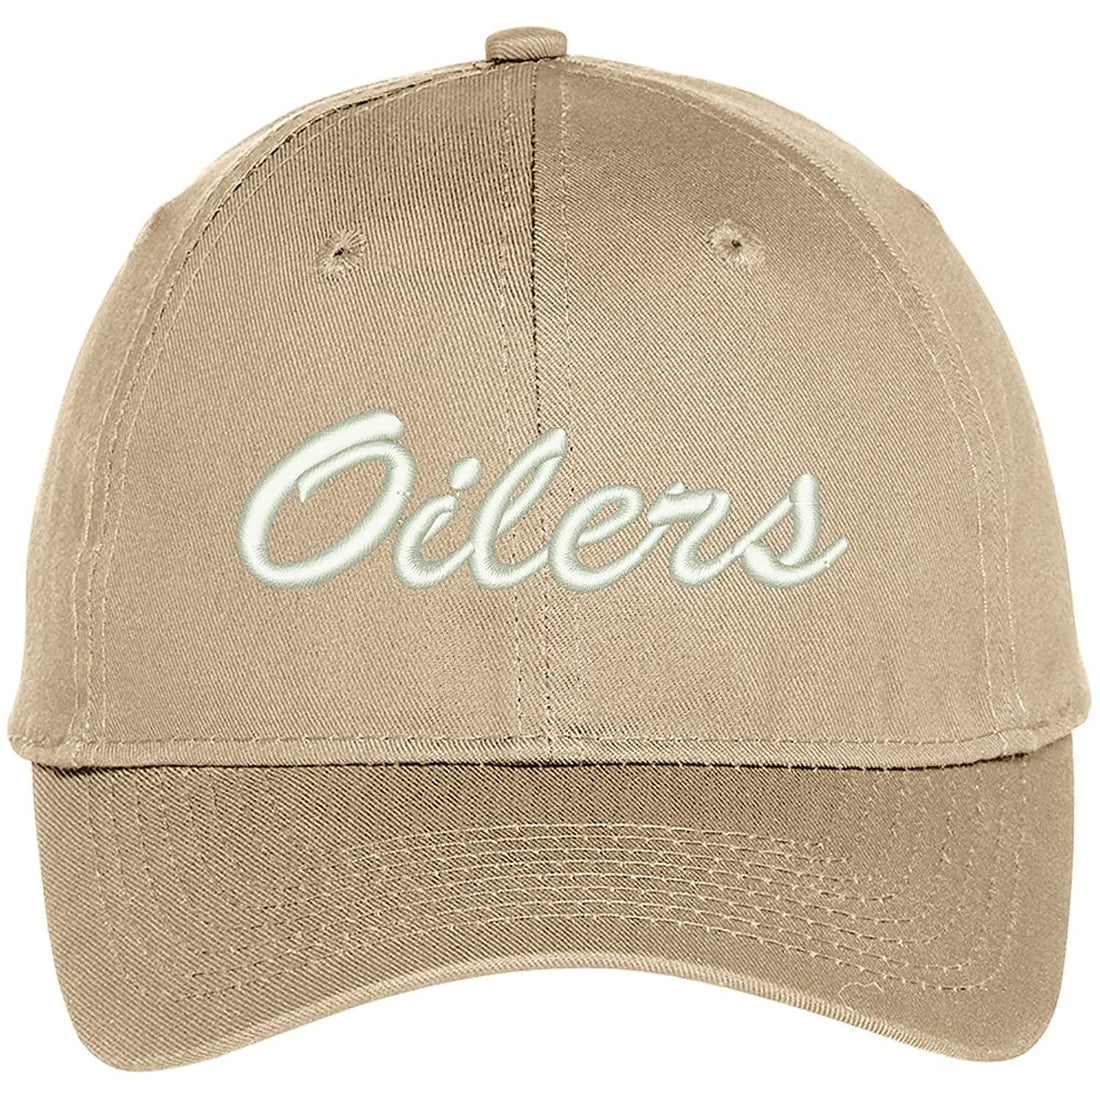 Trendy Apparel Shop Oilers Embroidered Precurved Adjustable Cap